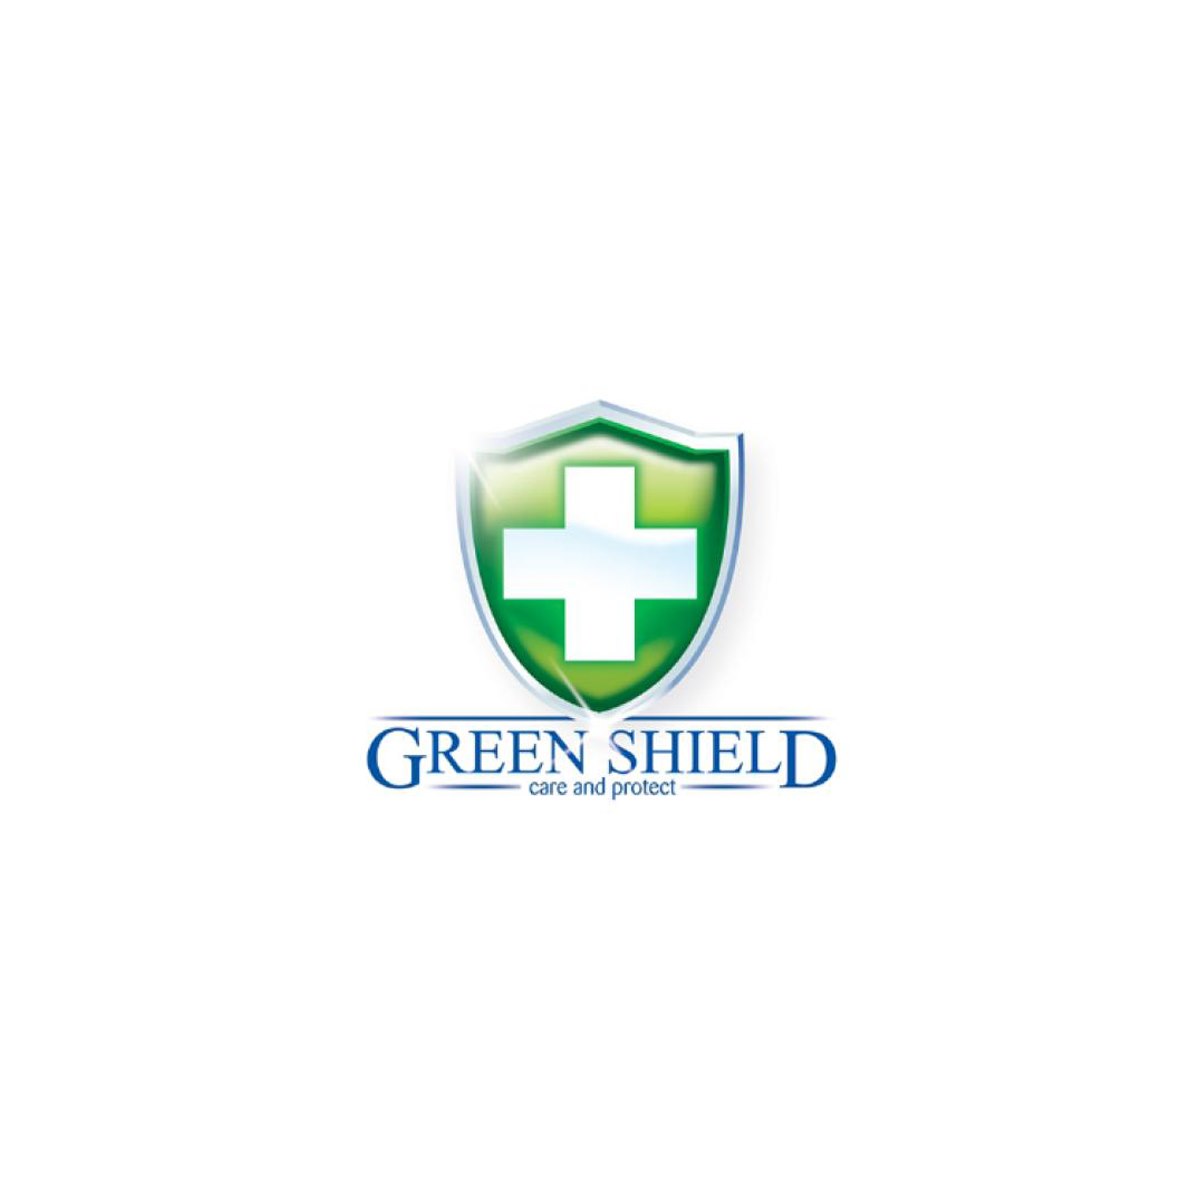 Where to Buy Green Shield Wipes